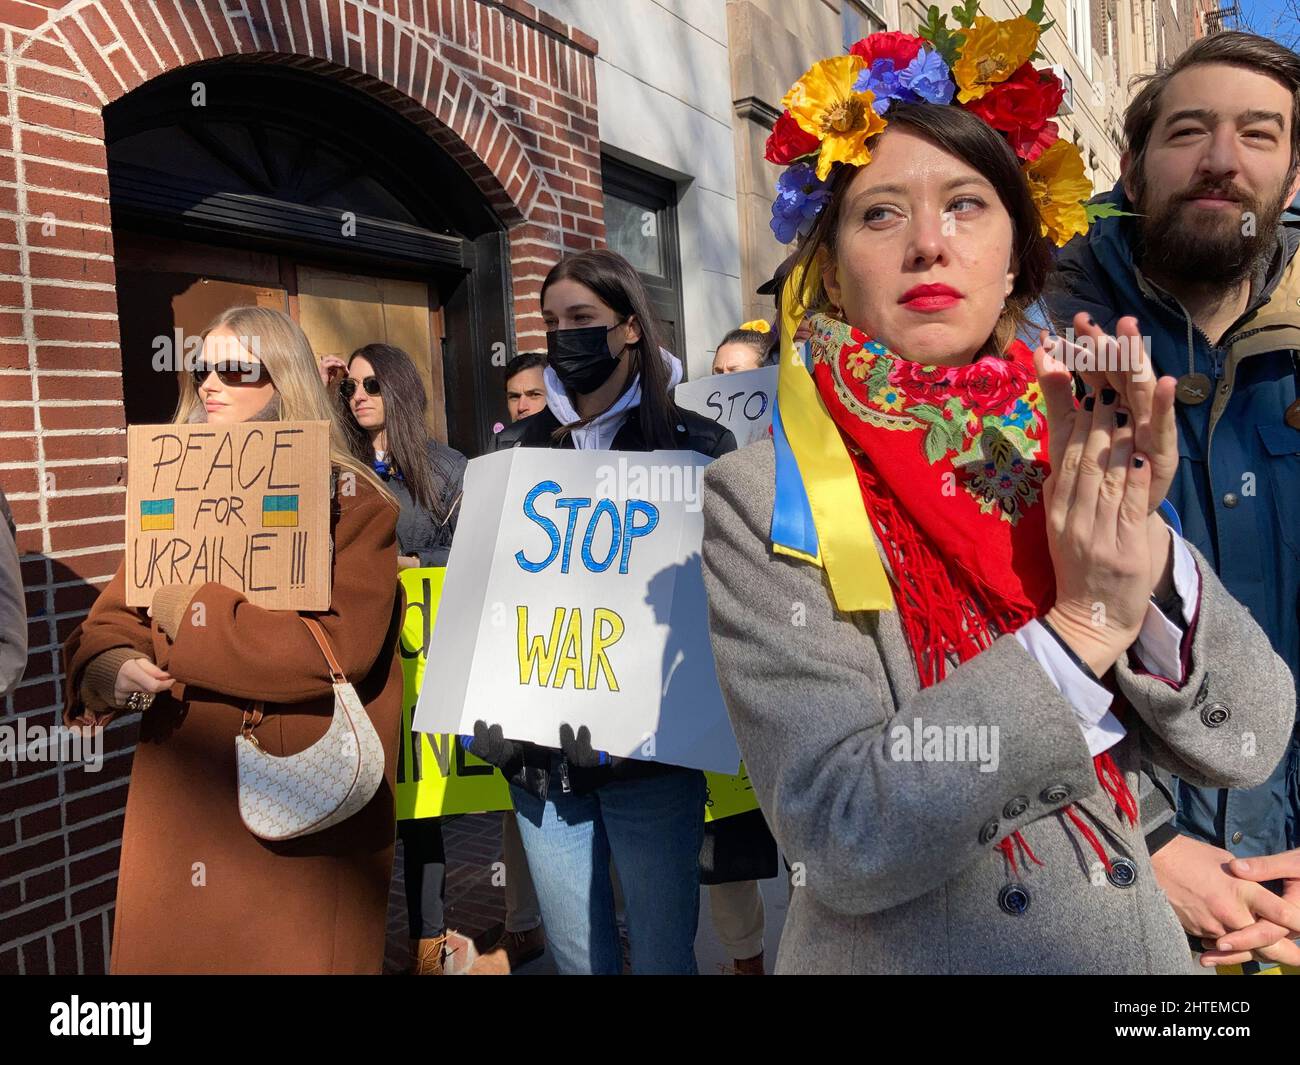 Members of the LGBTQ+ community, their supporters and Ukrainian-Americans protest the Russian invasion and show support for the citizens of the Ukraine, in front of the Stonewall Inn in Greenwich Village in New York on Saturday, February 26, 2022. (© Frances M. Roberts) Stock Photo